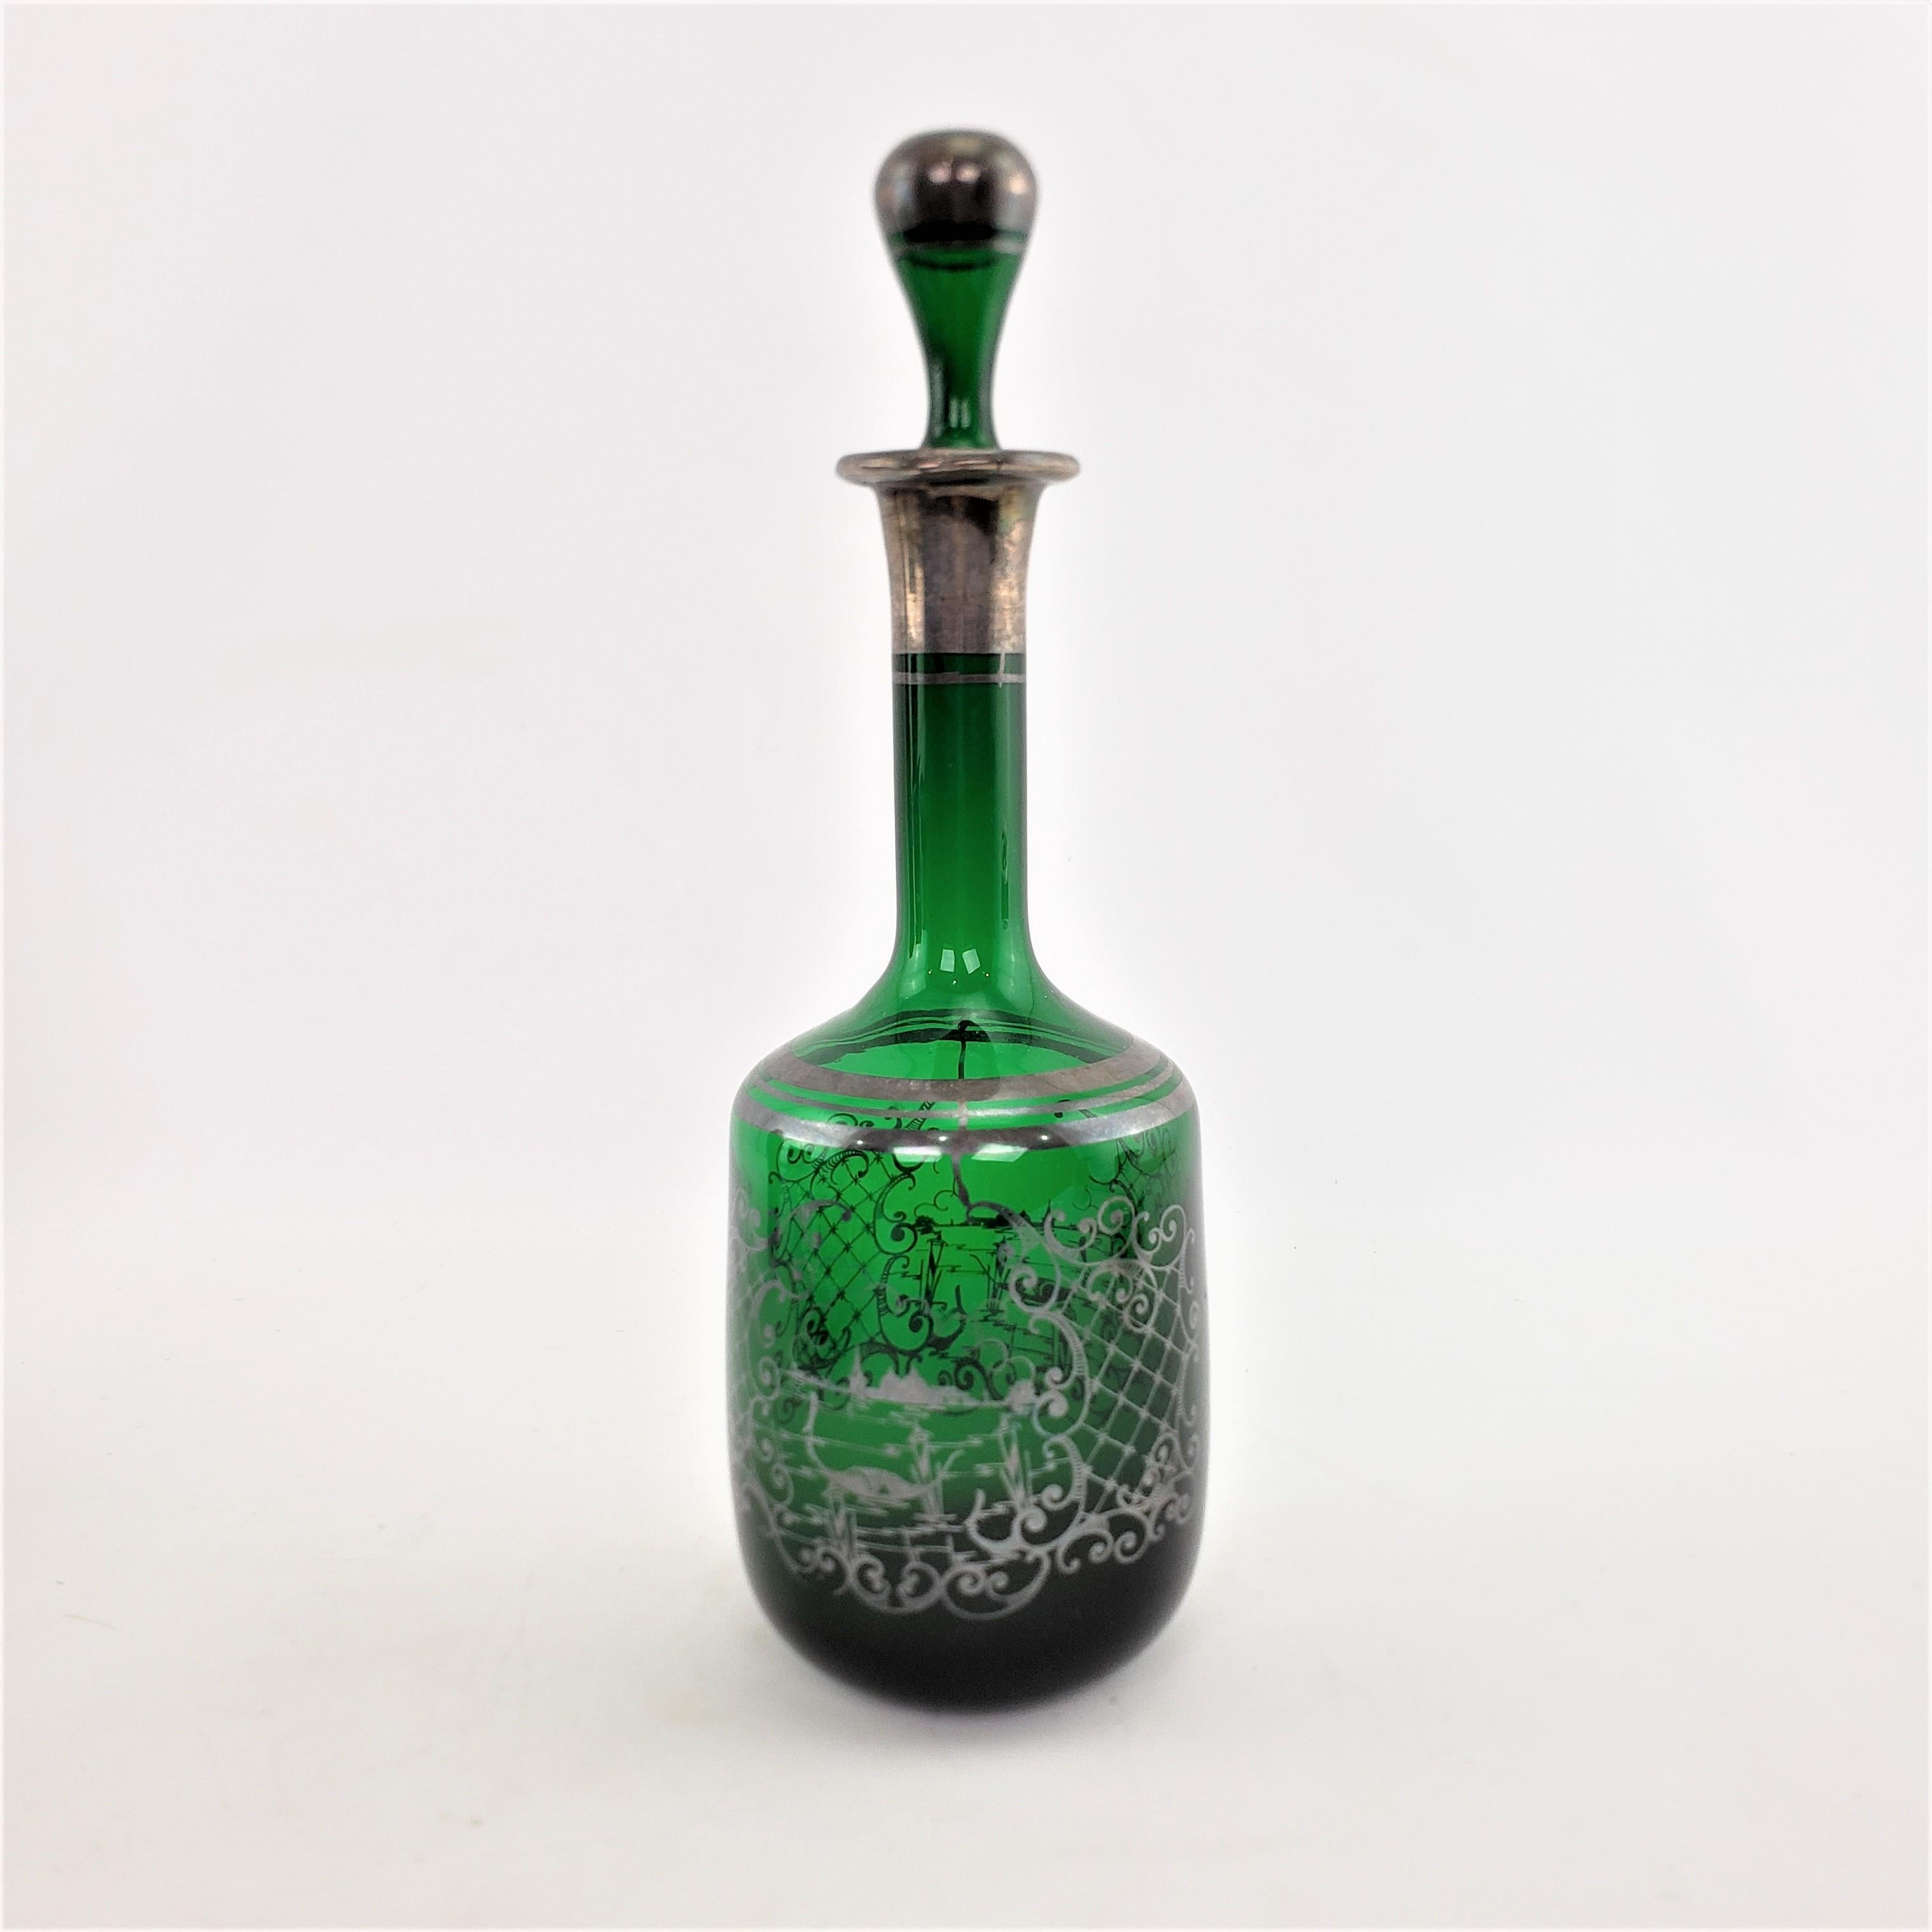 This antique bottle decanter is unsigned, but presumed to have been made in France in approximately 1920 in an Art Deco style. The decanter is done in a deep green glass with silver overlaid decoration in two identical pond vignettes framed in a